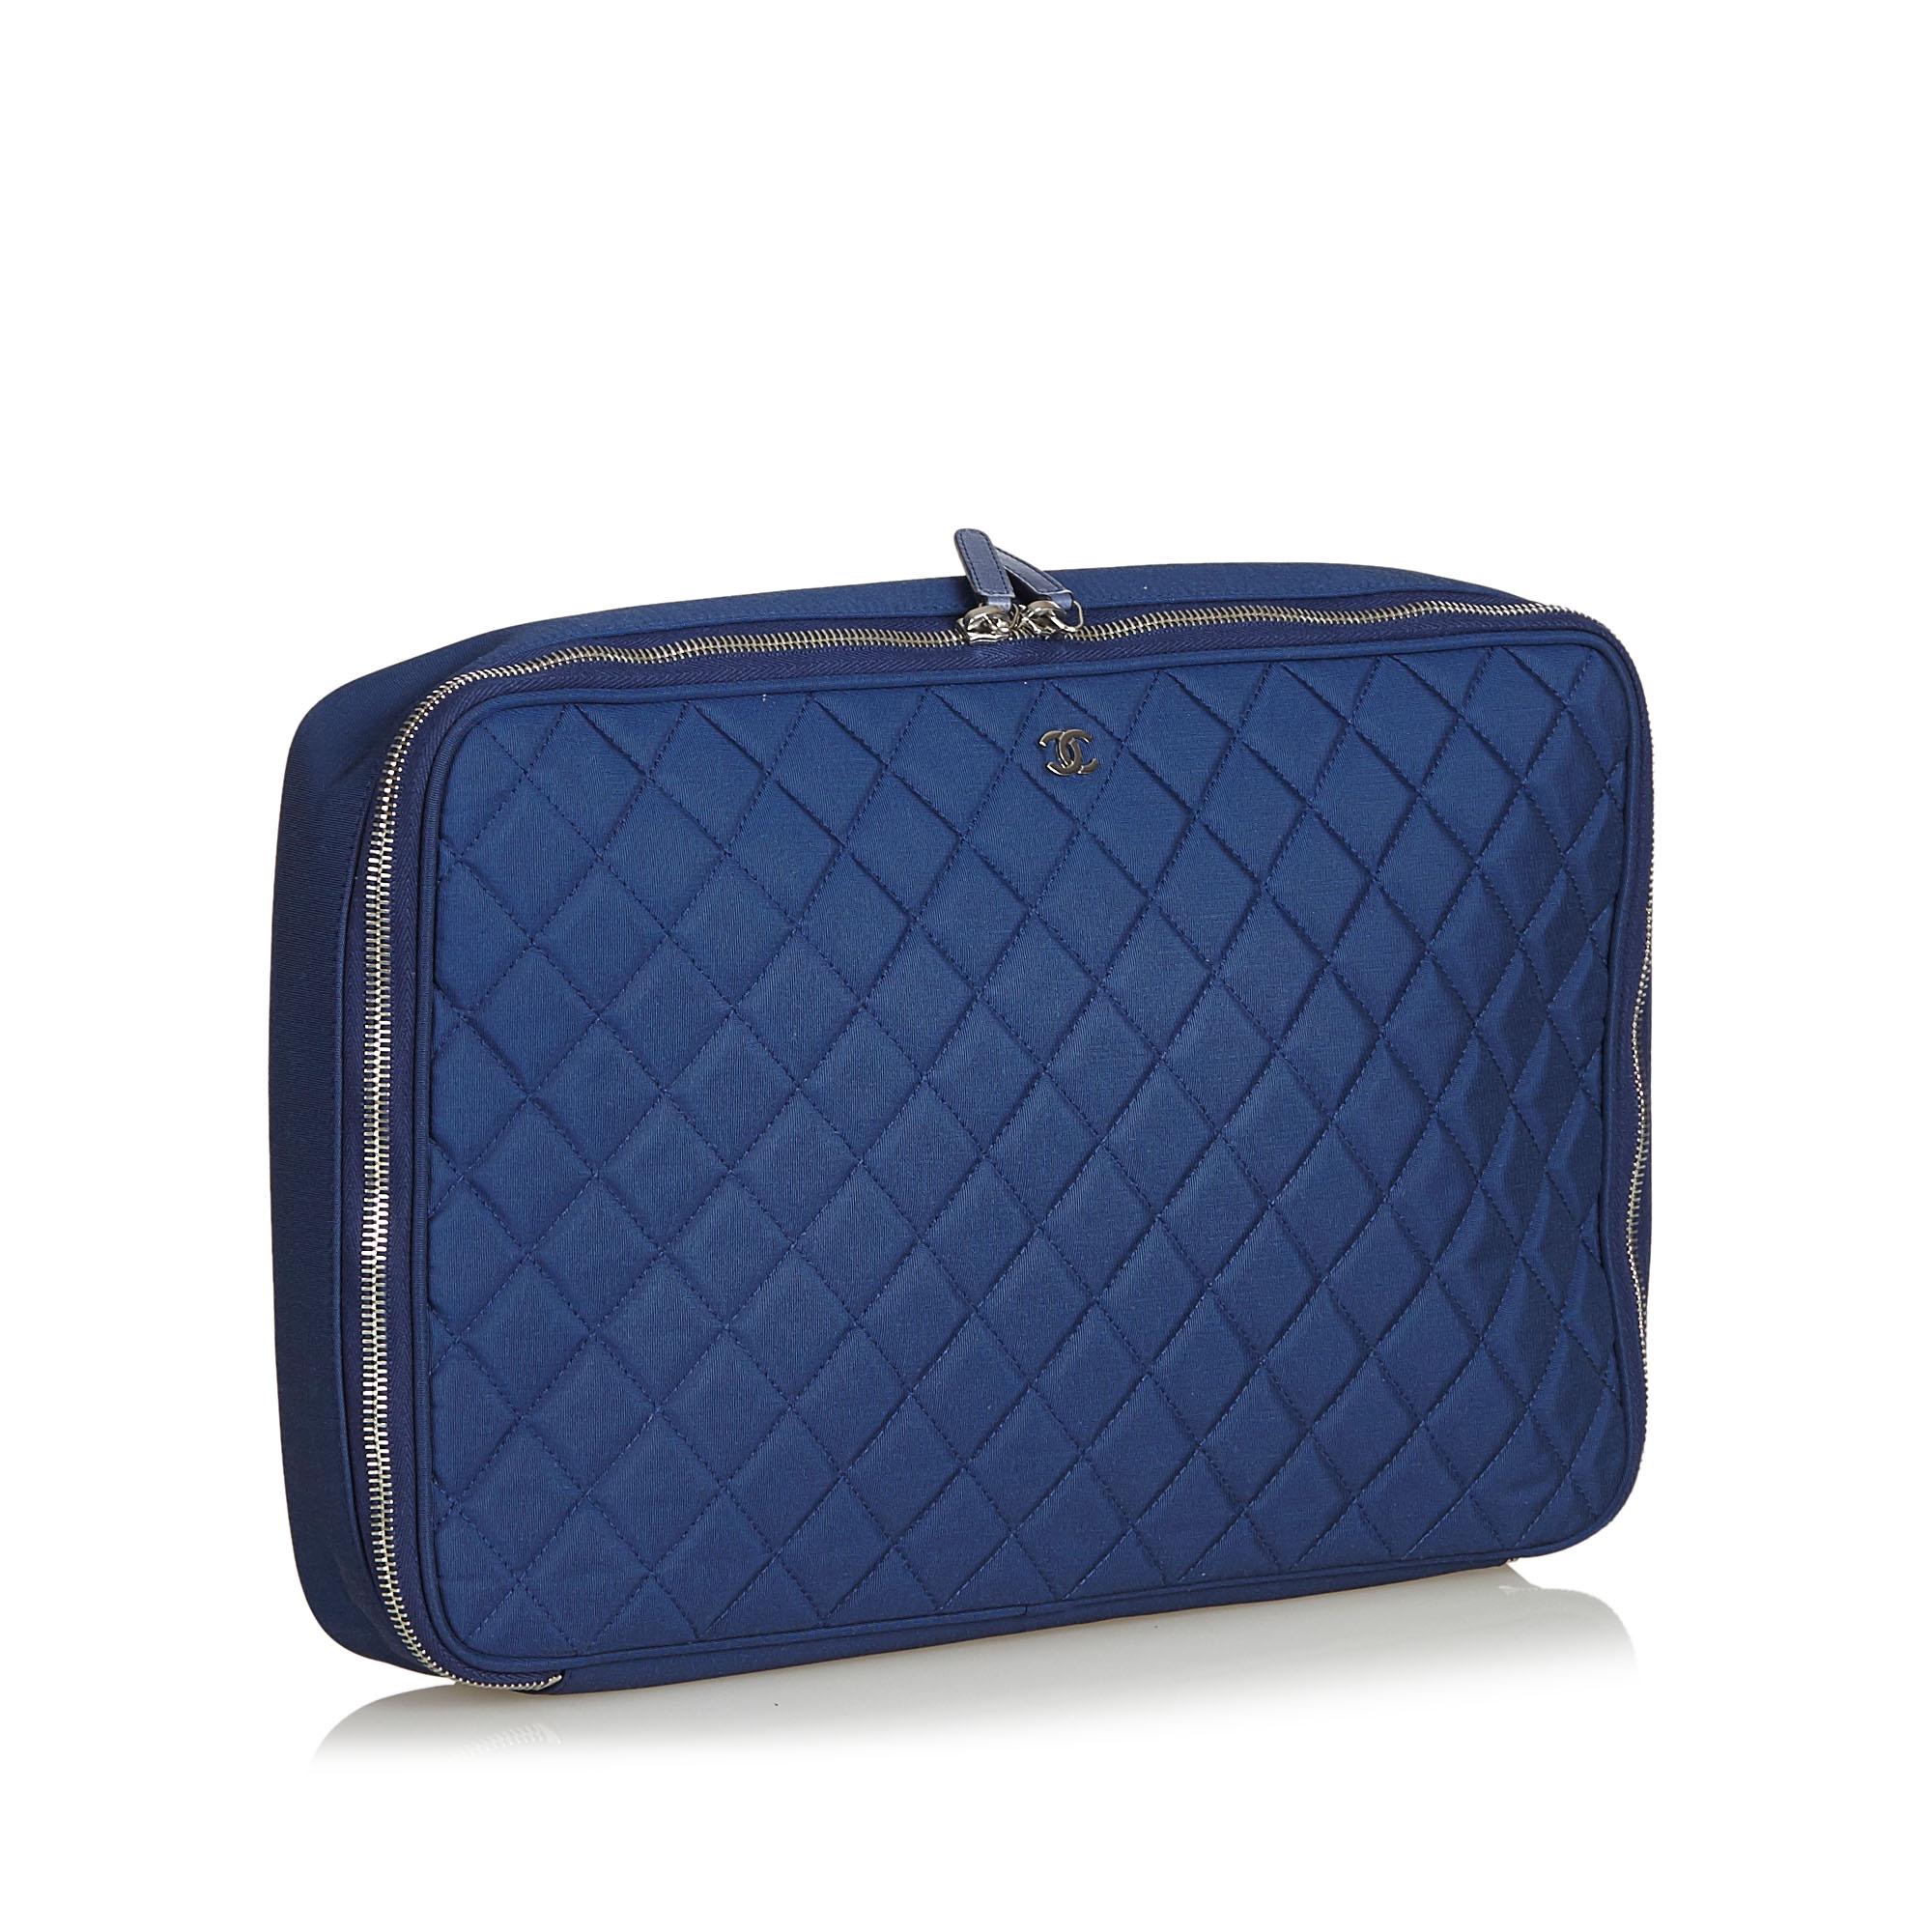 This laptop bag features a quilted nylon body, and a wrap around zip closure. It carries as AB condition rating.

Inclusions: 
This item does not come with inclusions.

Dimensions:
Length: 24.00 cm
Width: 37.00 cm
Depth: 6.00 cm

Serial Number: With